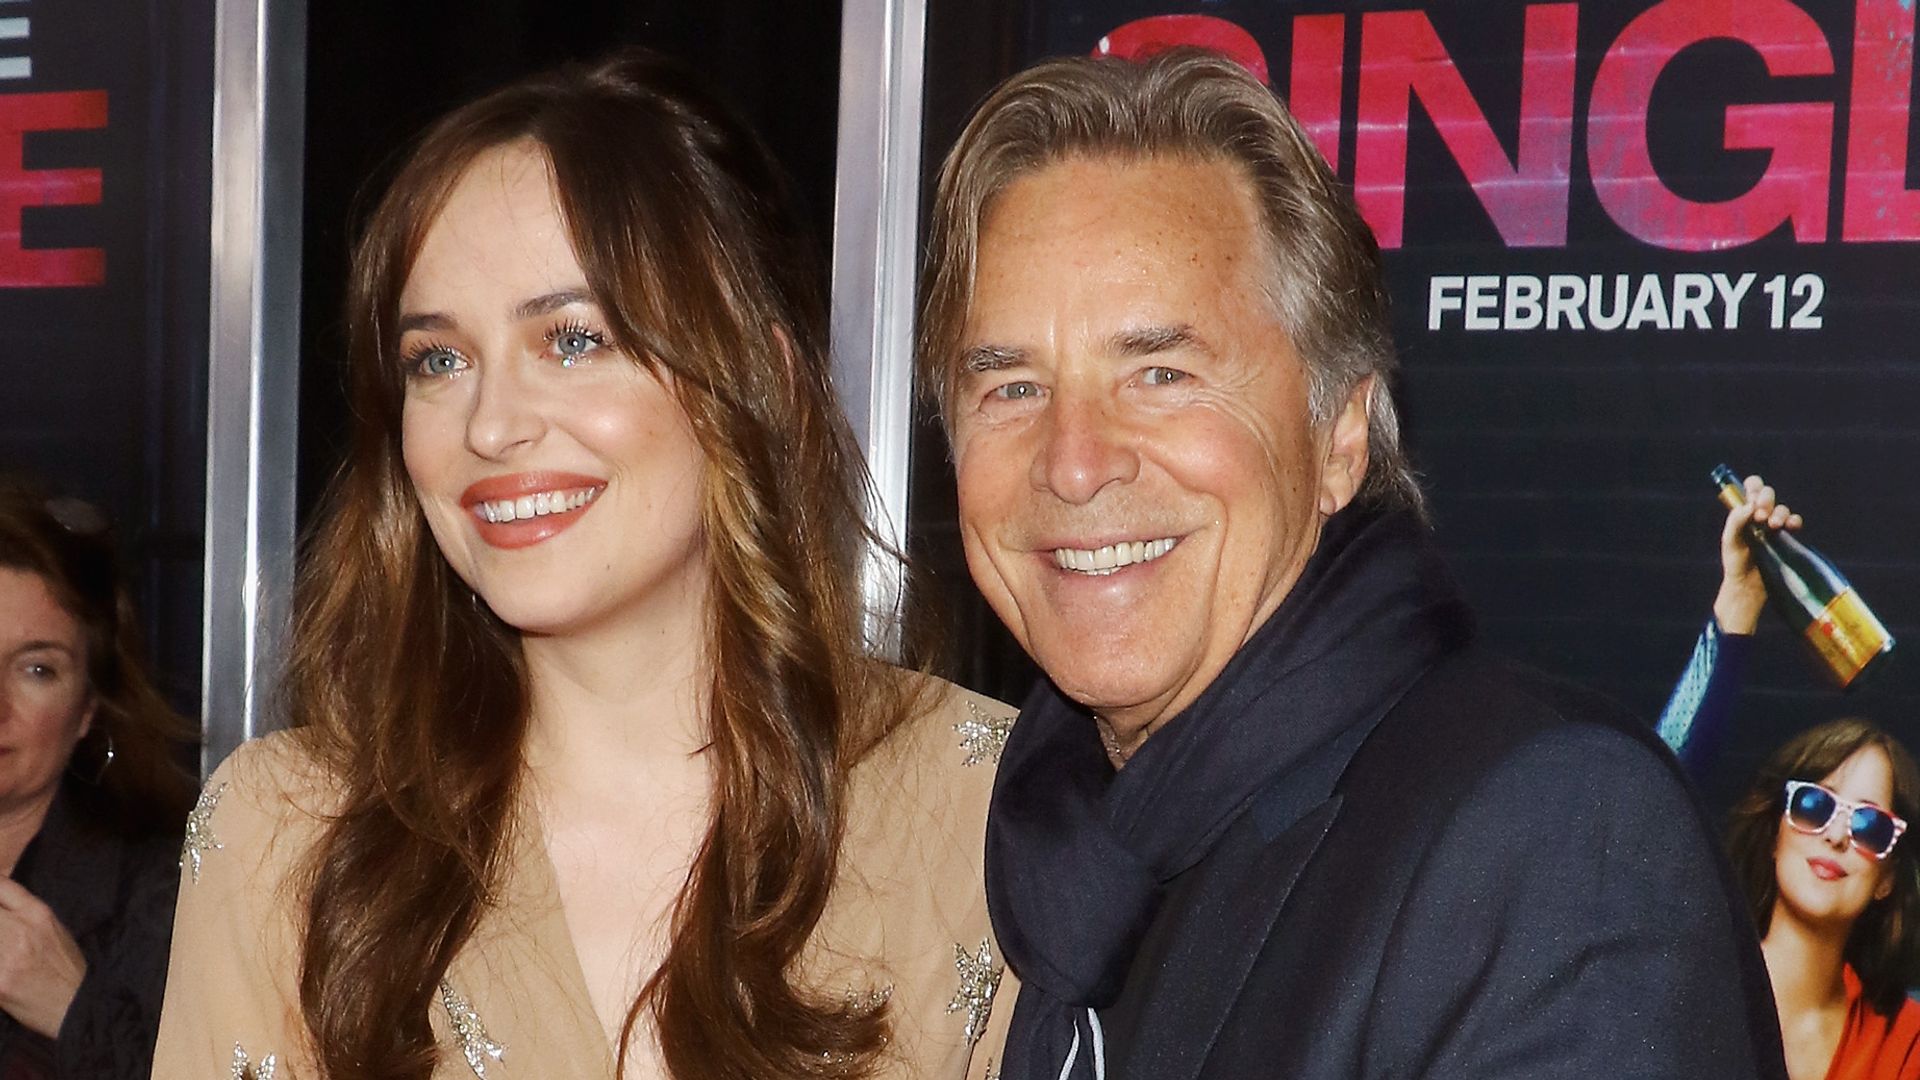 Dakota Johnson and Don Johnson attends the "How To Be Single" New York premiere at NYU Skirball Center on February 3, 2016 in New York City